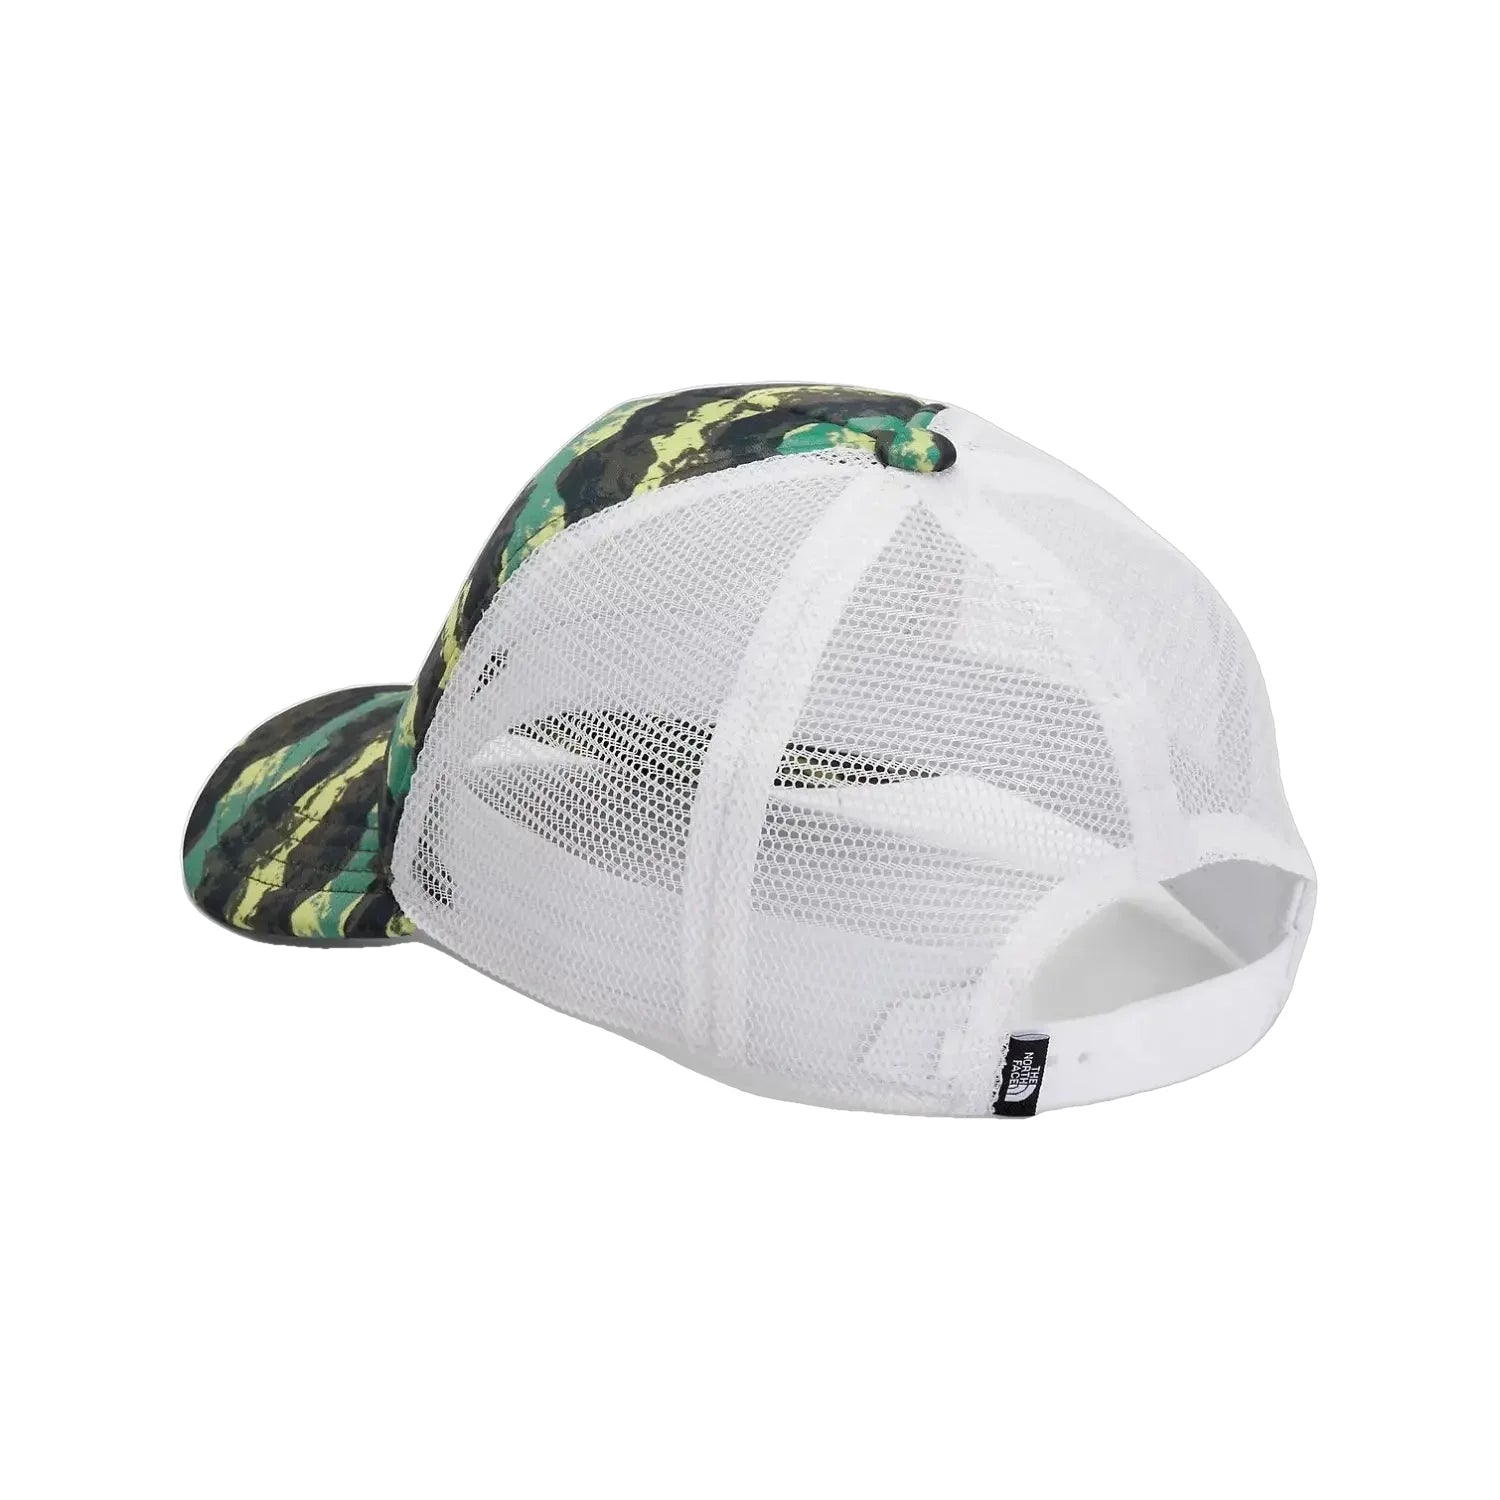 The North Face Kid's Foam Trucker Hat Deep Grass Green Mountain color. White mesh back with adjustable closure. Back View. 